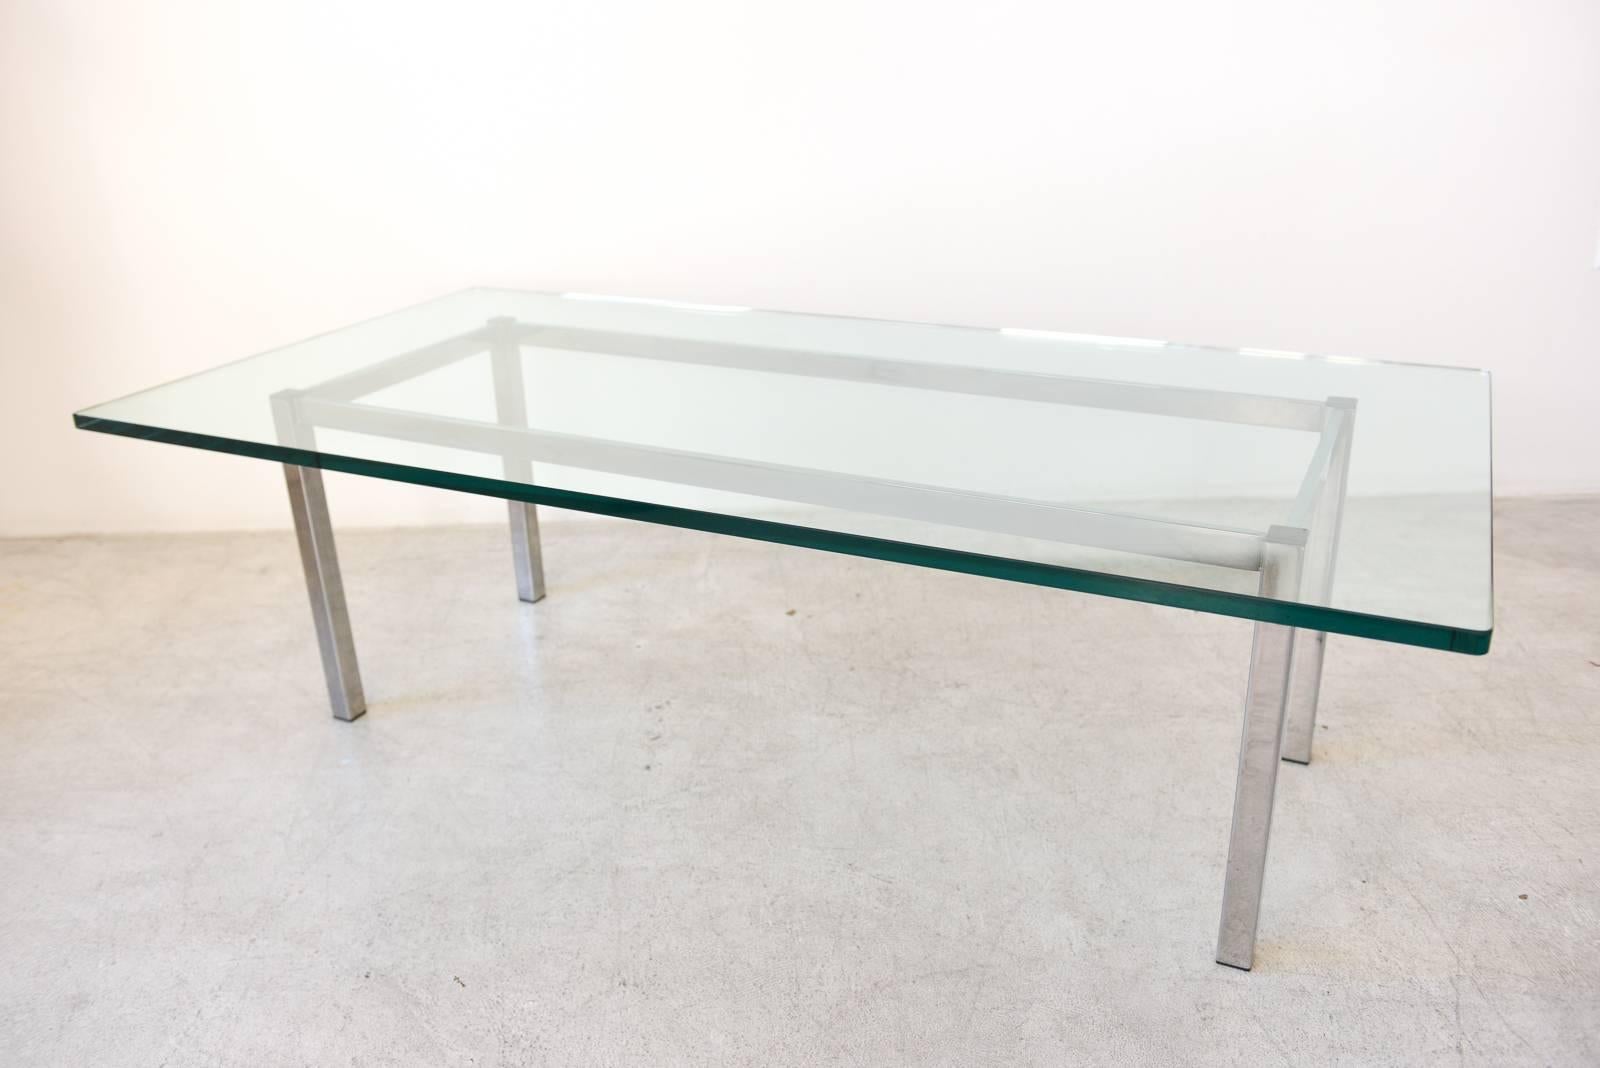 Custom-made chrome and glass rectangular coffee table with heavy, thick beveled glass. Excellent condition.

Measures: 56